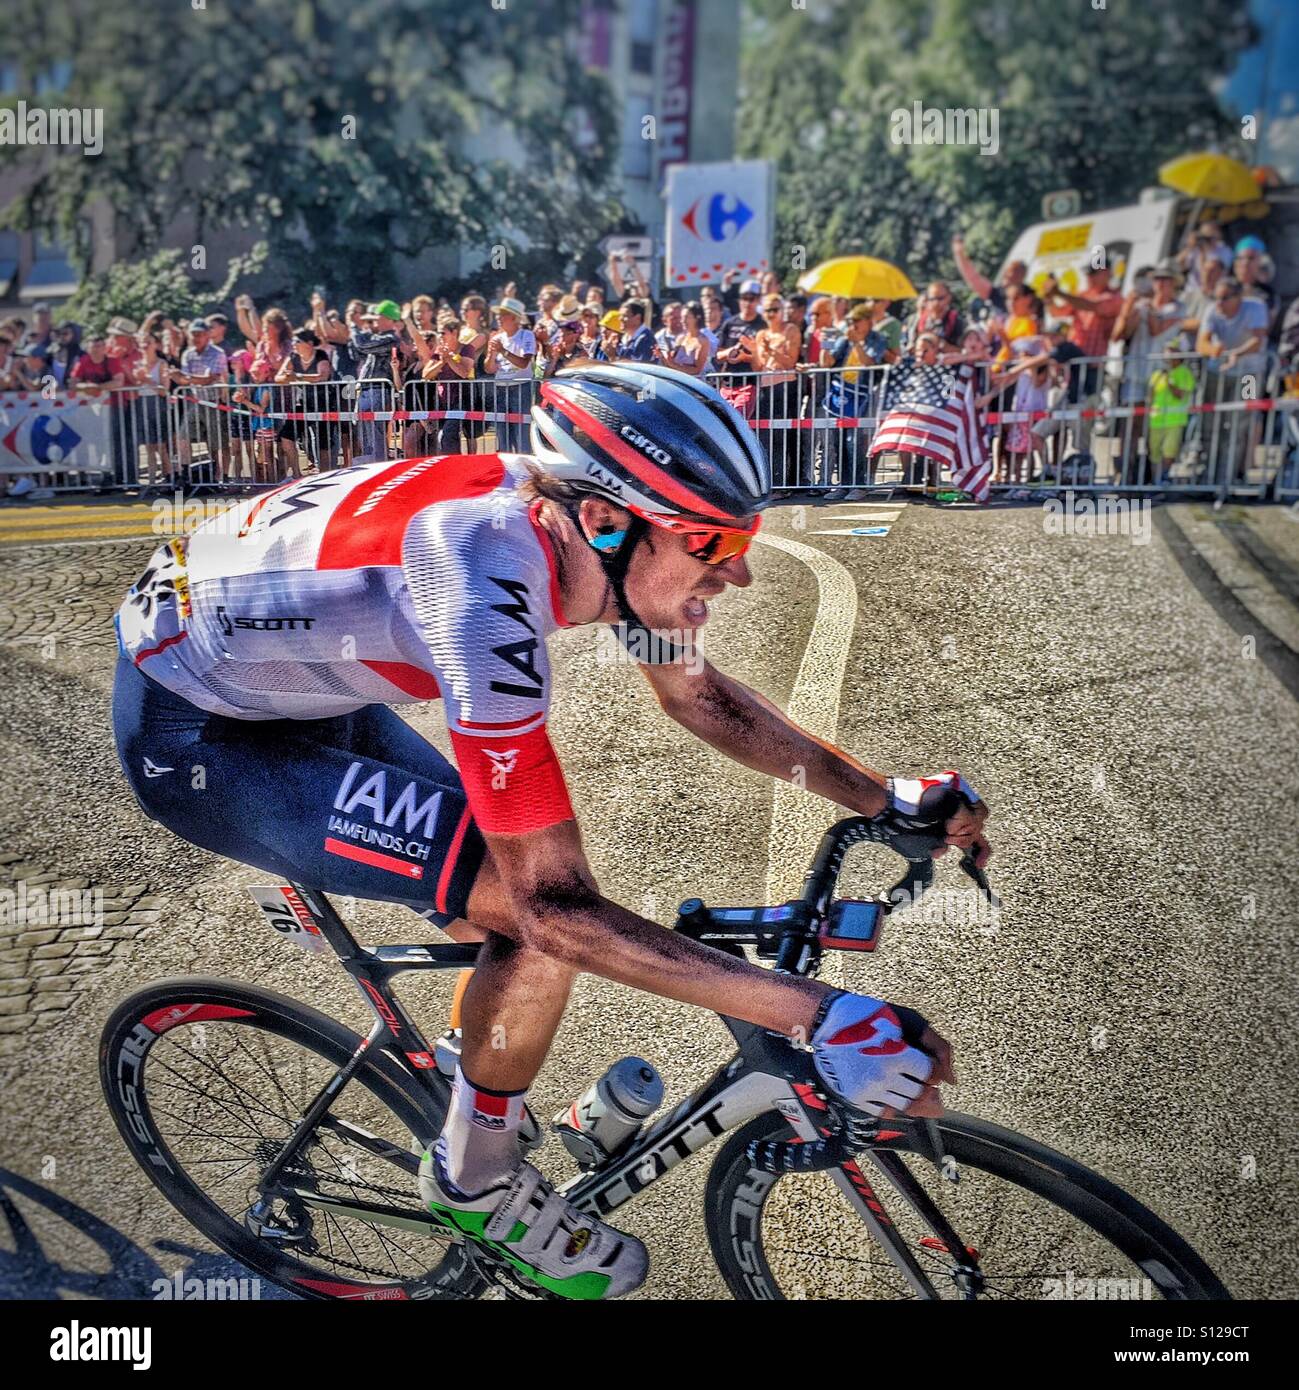 Reto Hollenstein competing in the Tour de France Stock Photo - Alamy